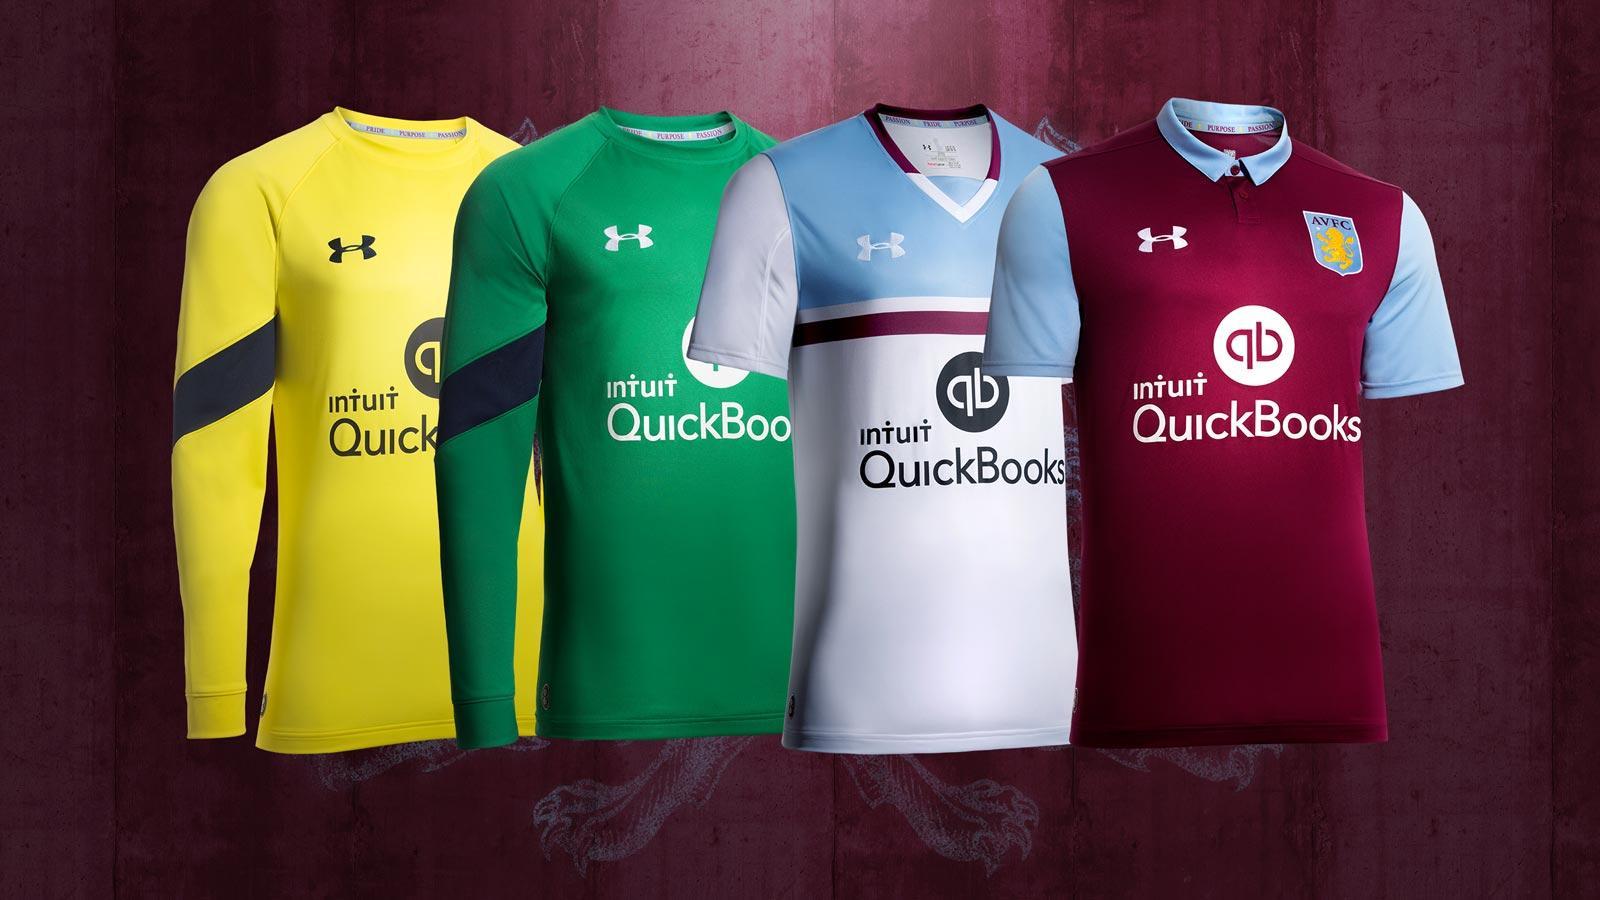 Under Armour Aston Villa 16 17 Home And Away Kits Released